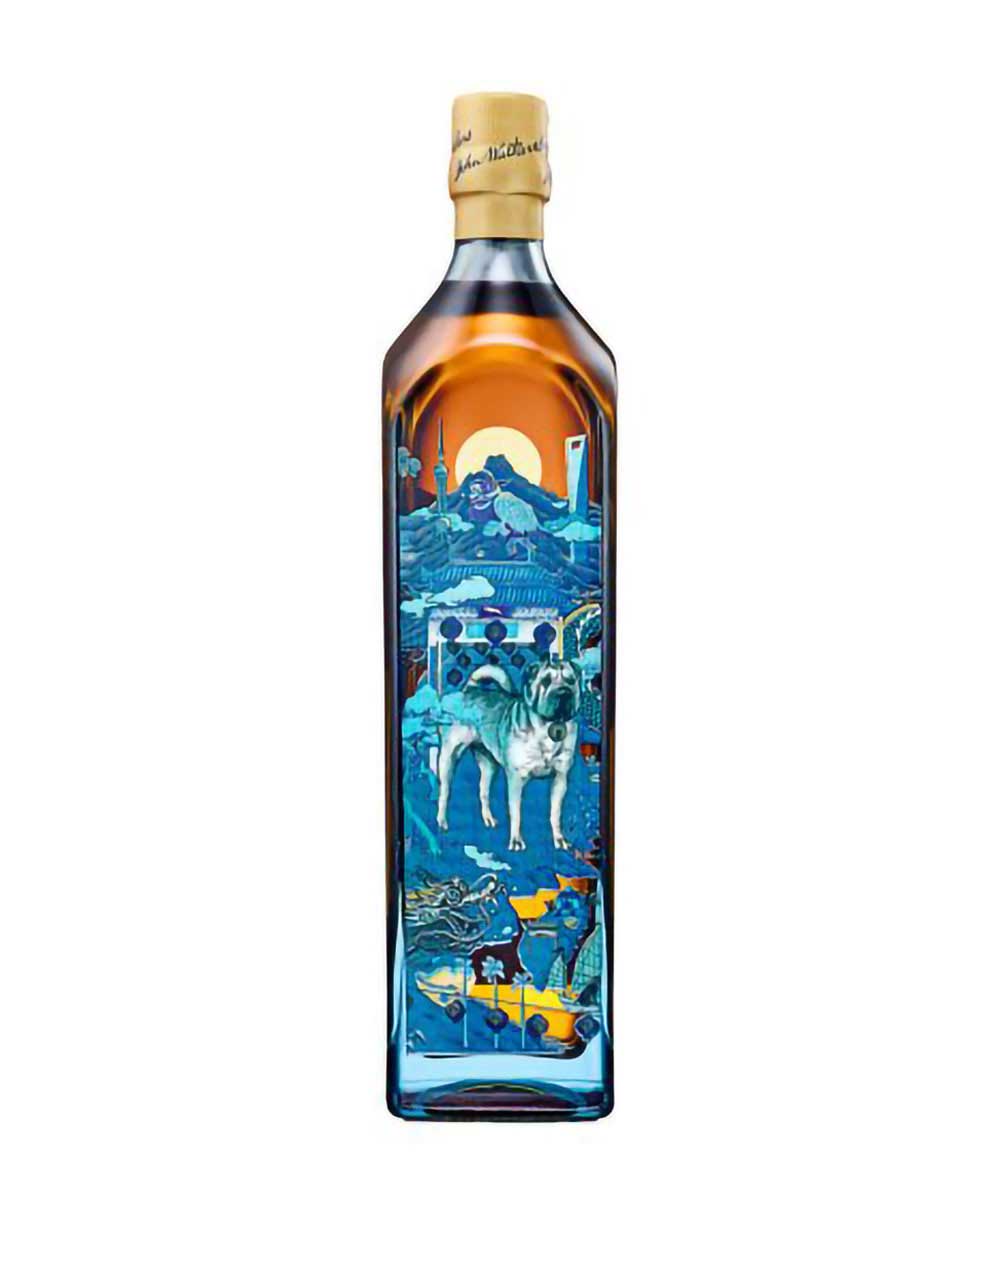 Johnnie Walker Blue Label Year of the Dog Scotch Whisky